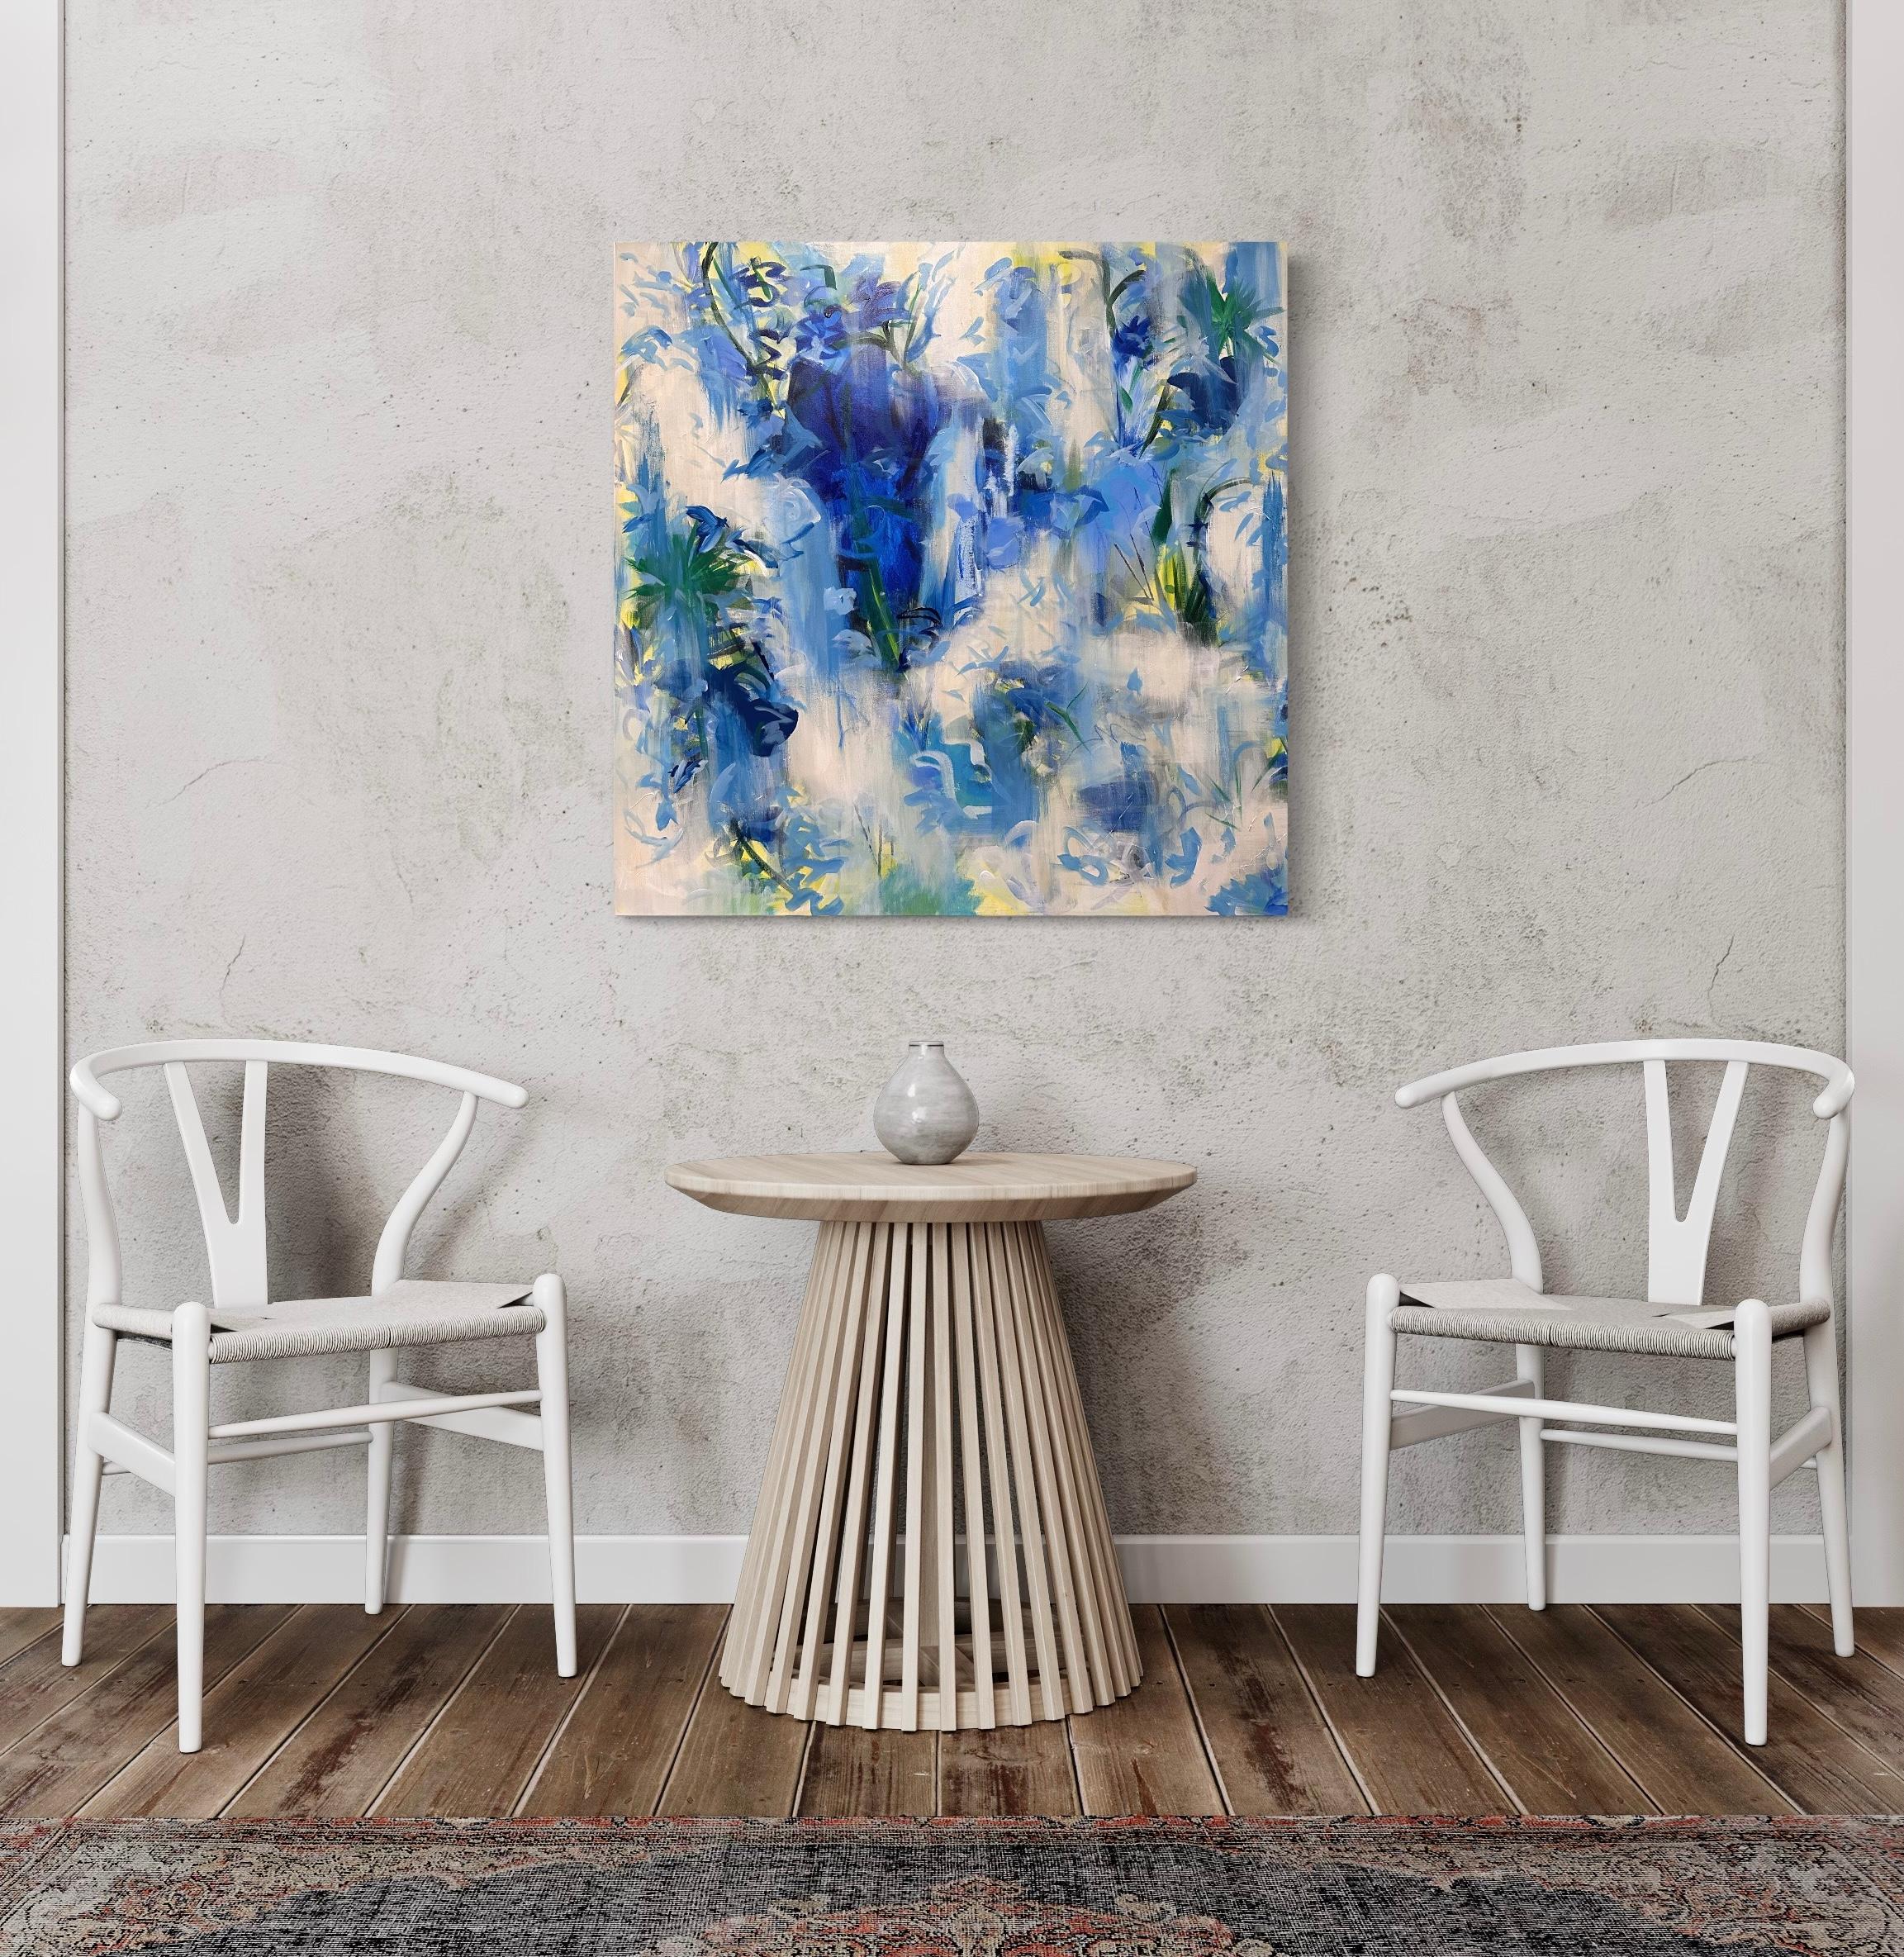 Spring is Sprung (Blue, White , Yellow, Floral, Landscape, Abstract) - Painting by Kimberly Marney